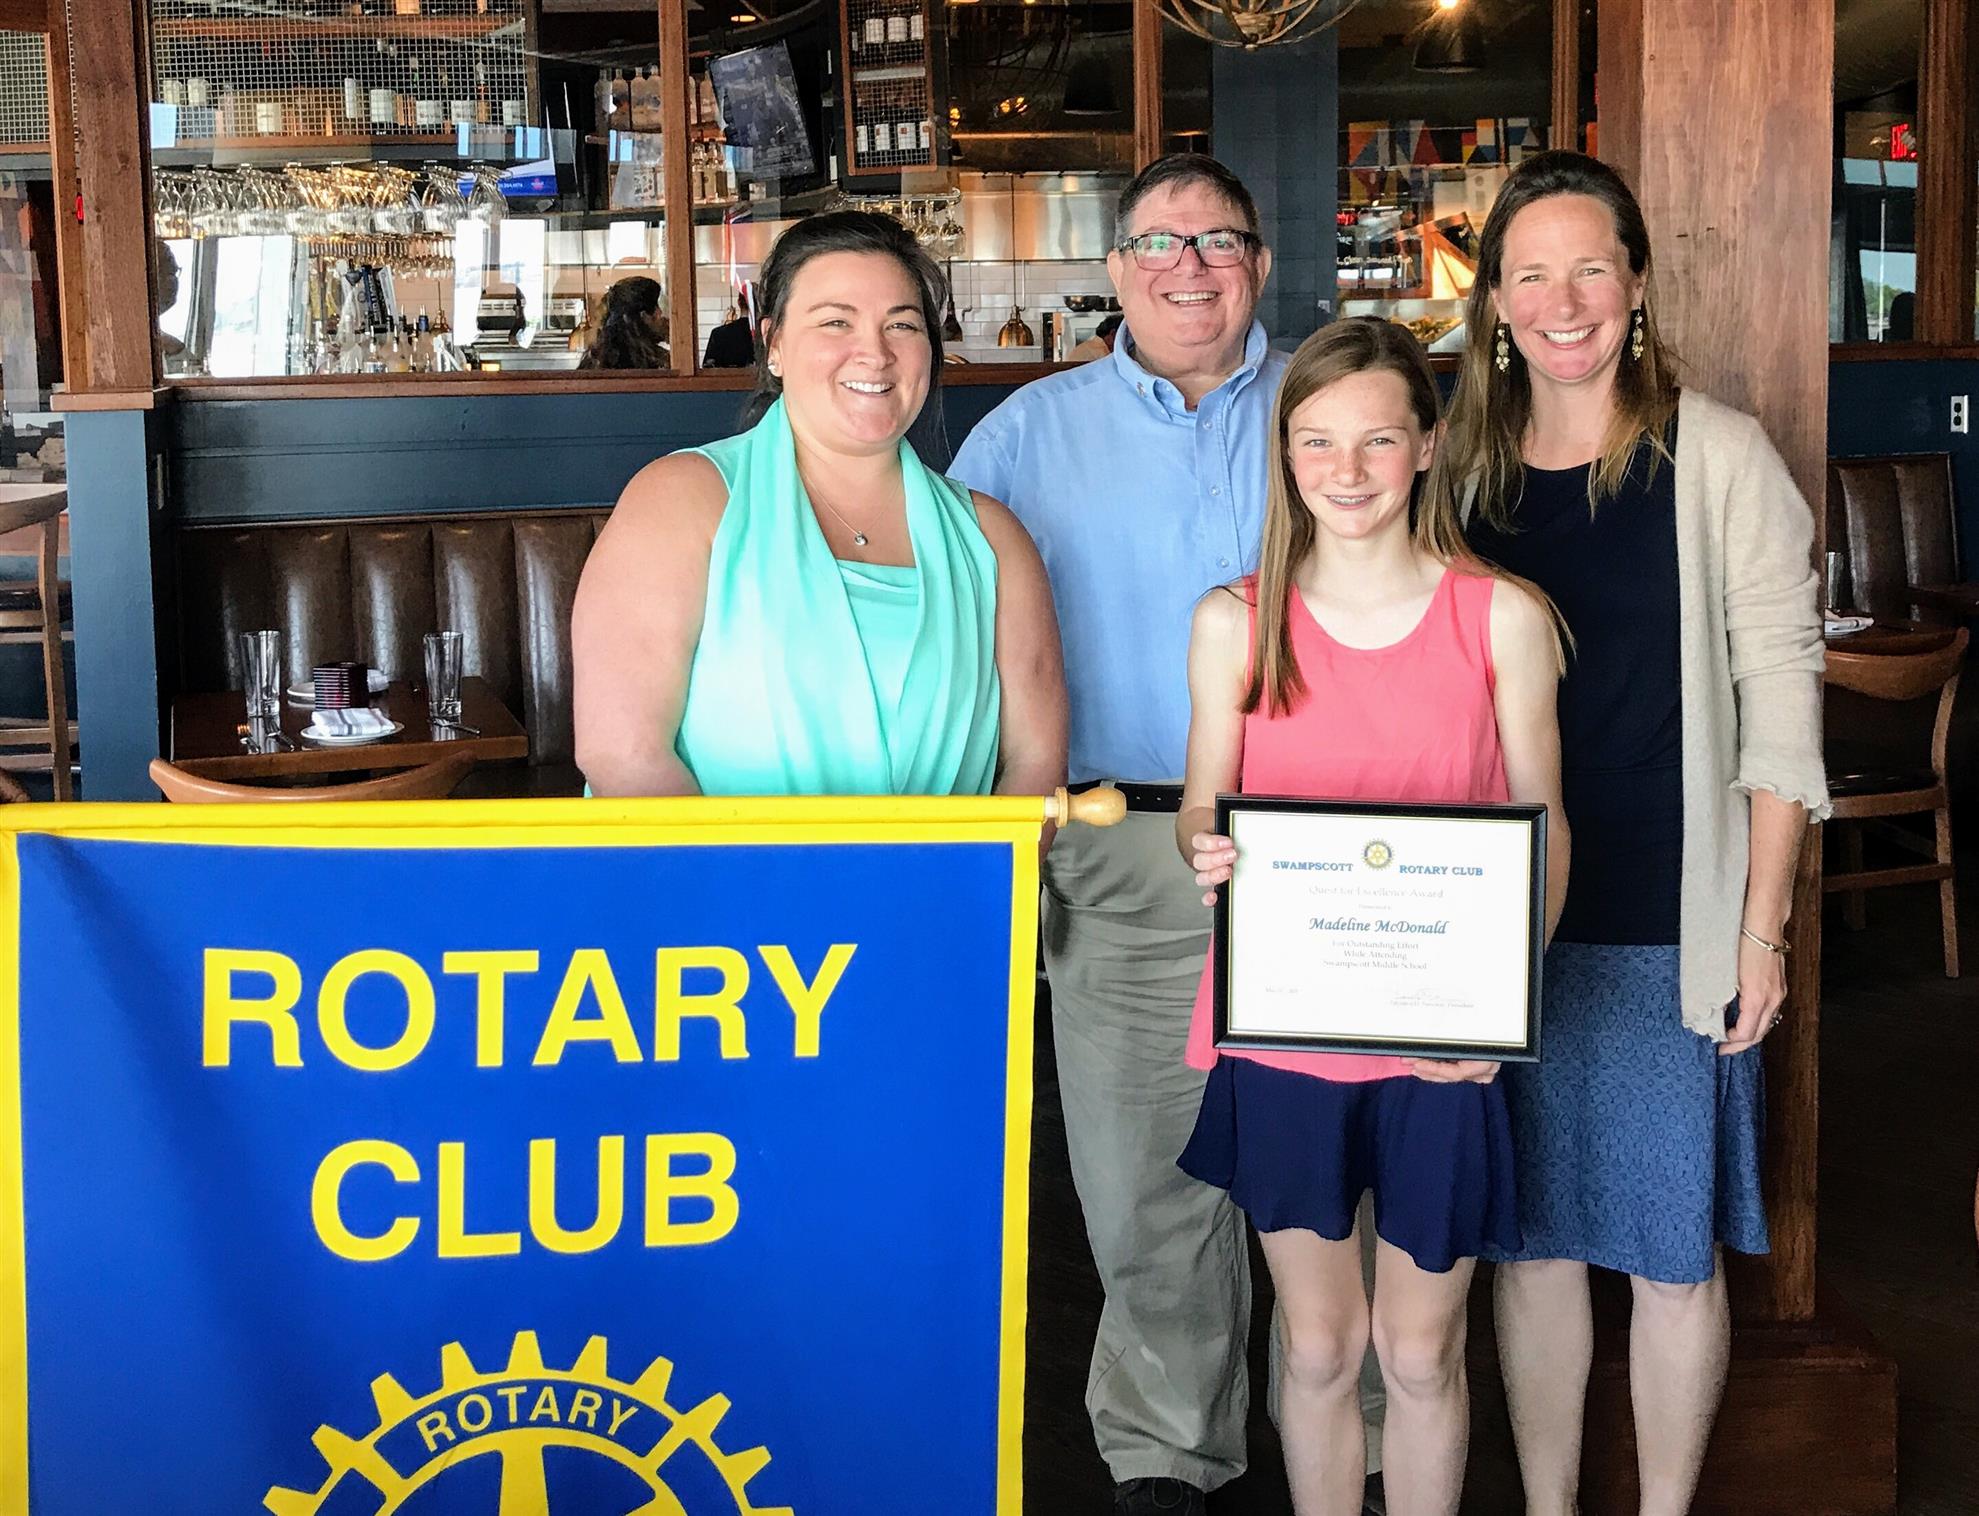 Madeline McDonald Awarded Quest for Excellence | Rotary Club of Swampscott